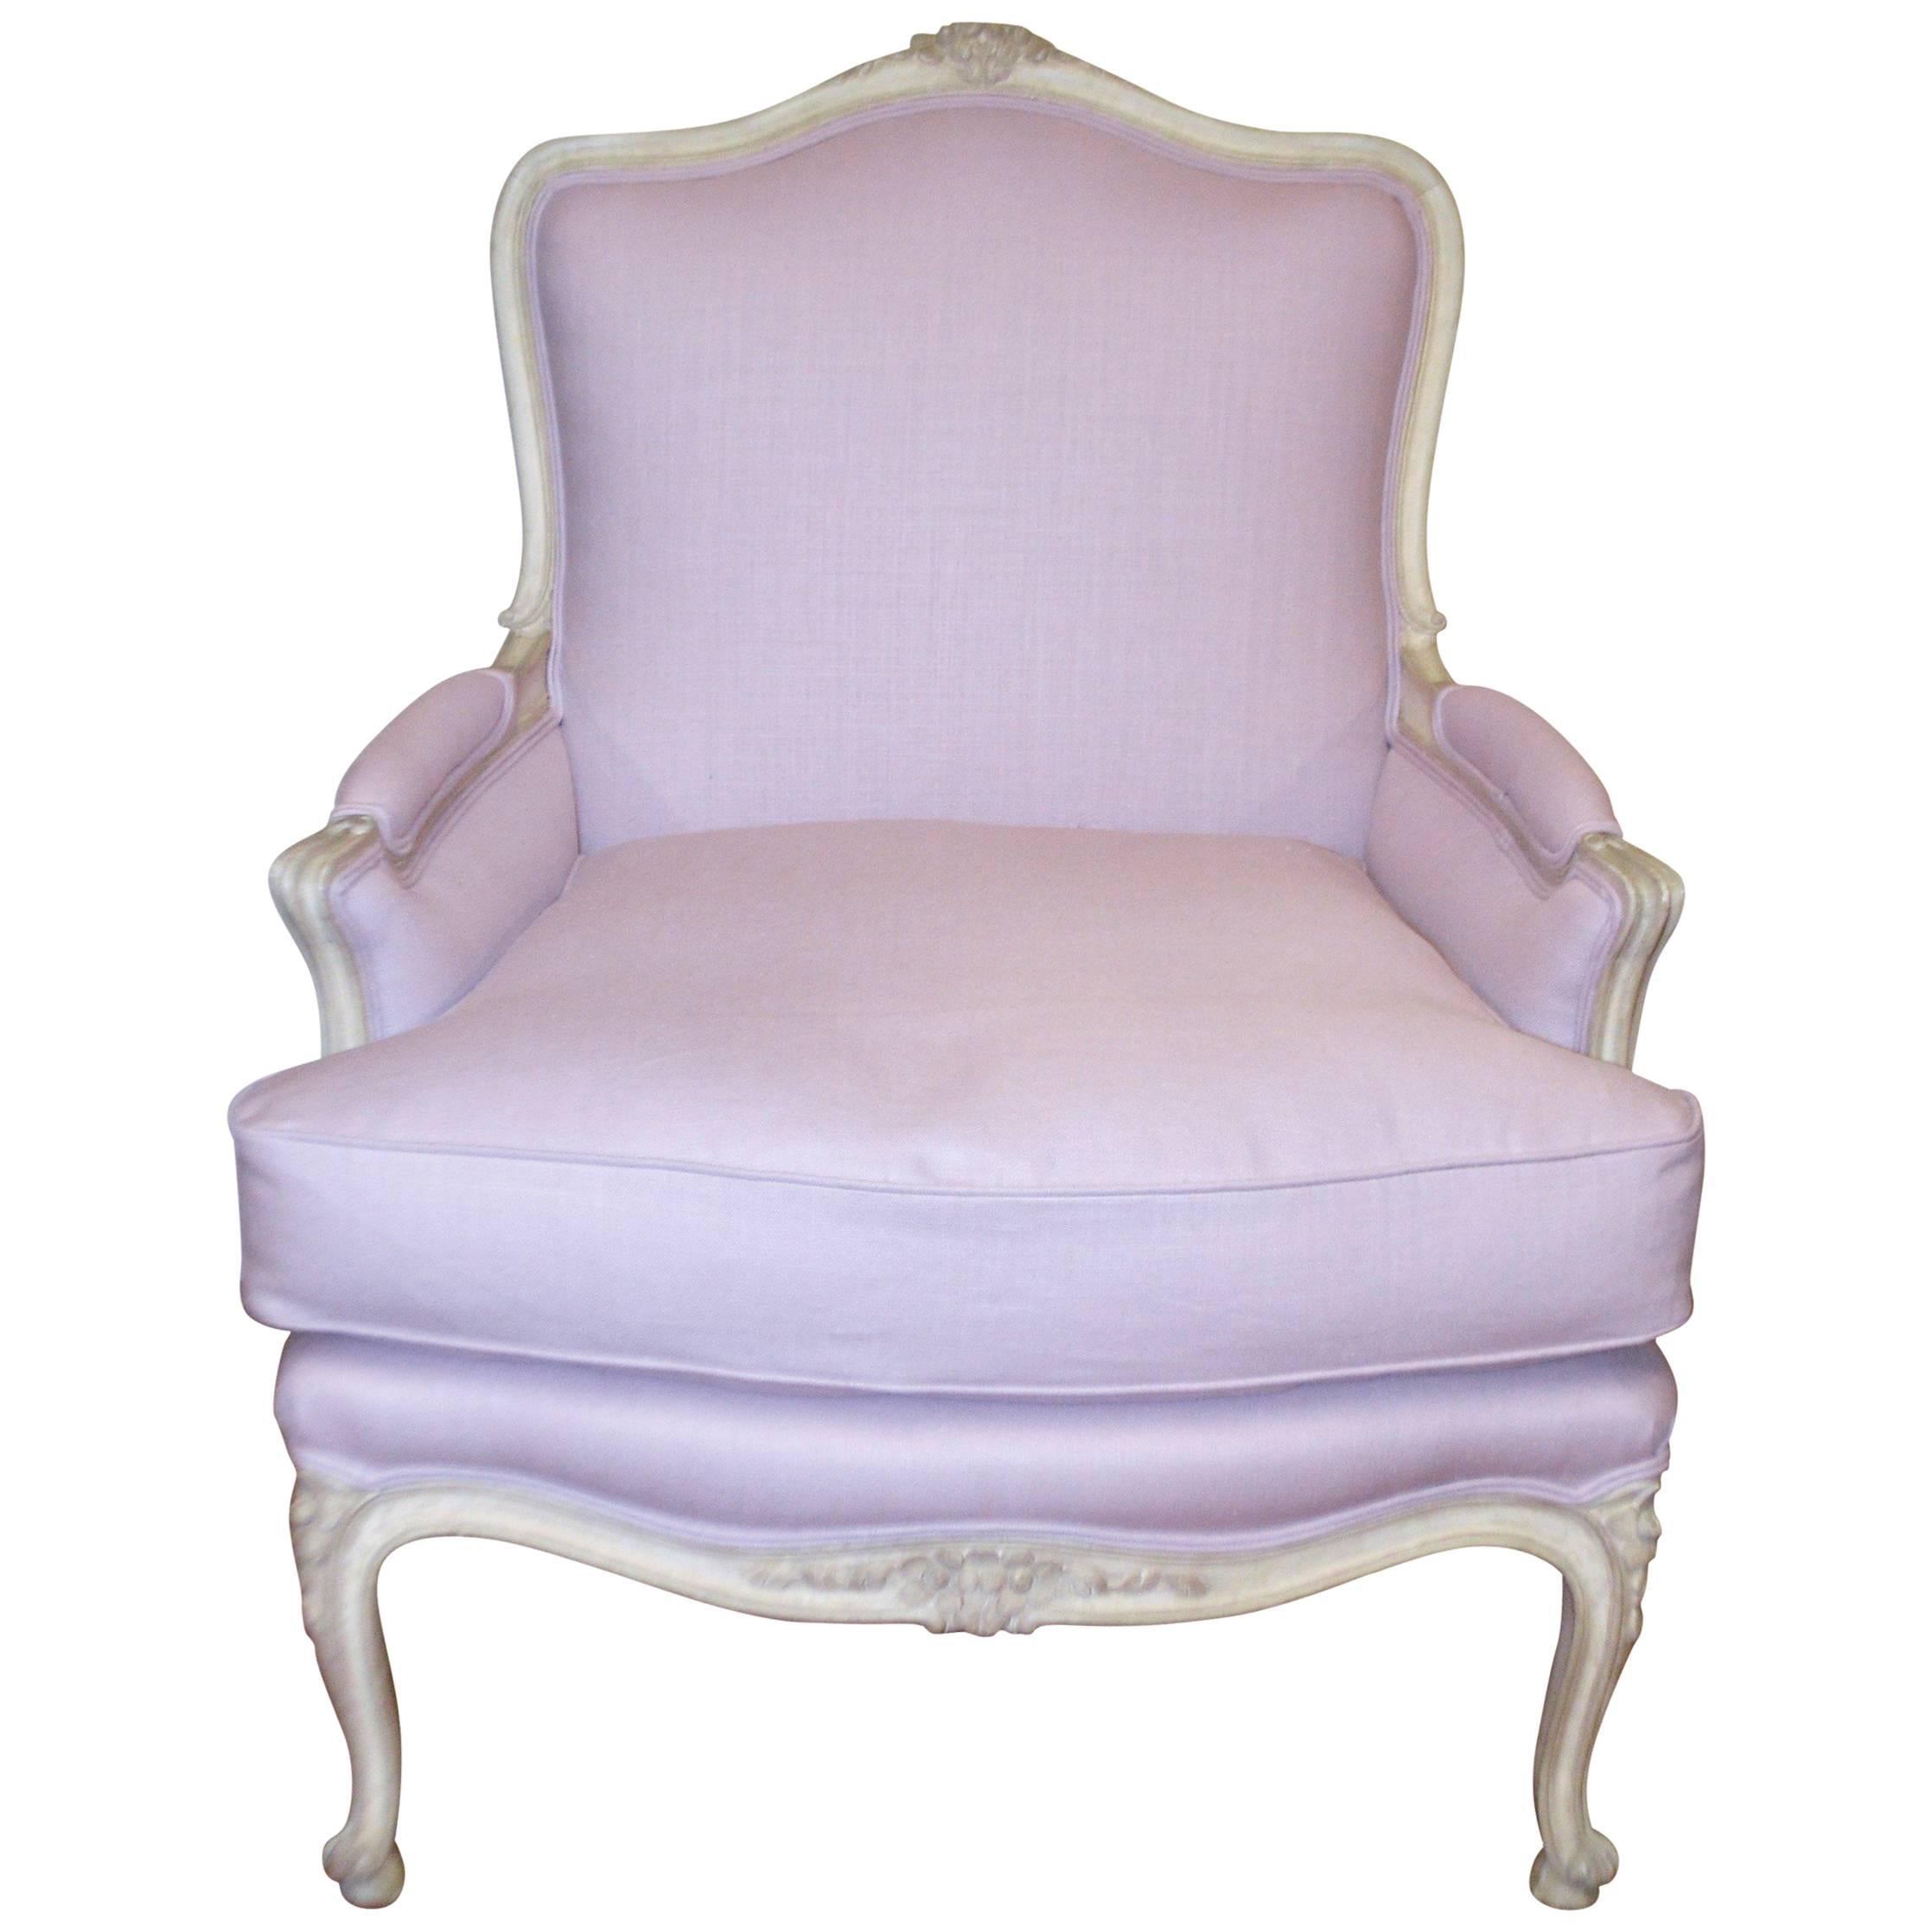 Louis XV Style Painted Bergere Chair Upholstered in a Lavender Linen